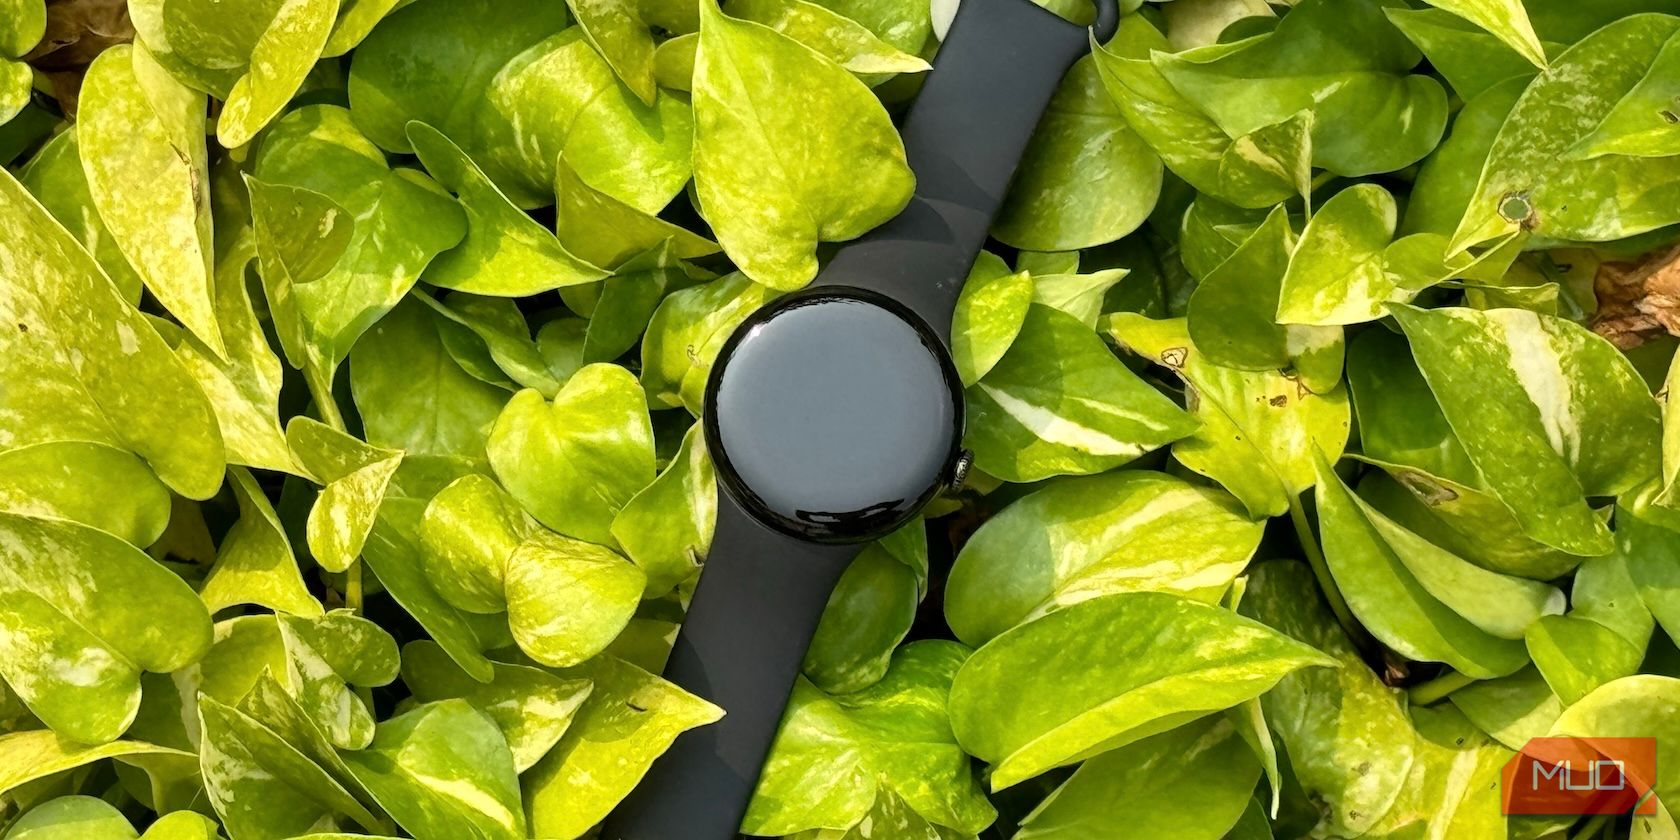 Top shot of a Google Pixel Watch 2 resting on leaves